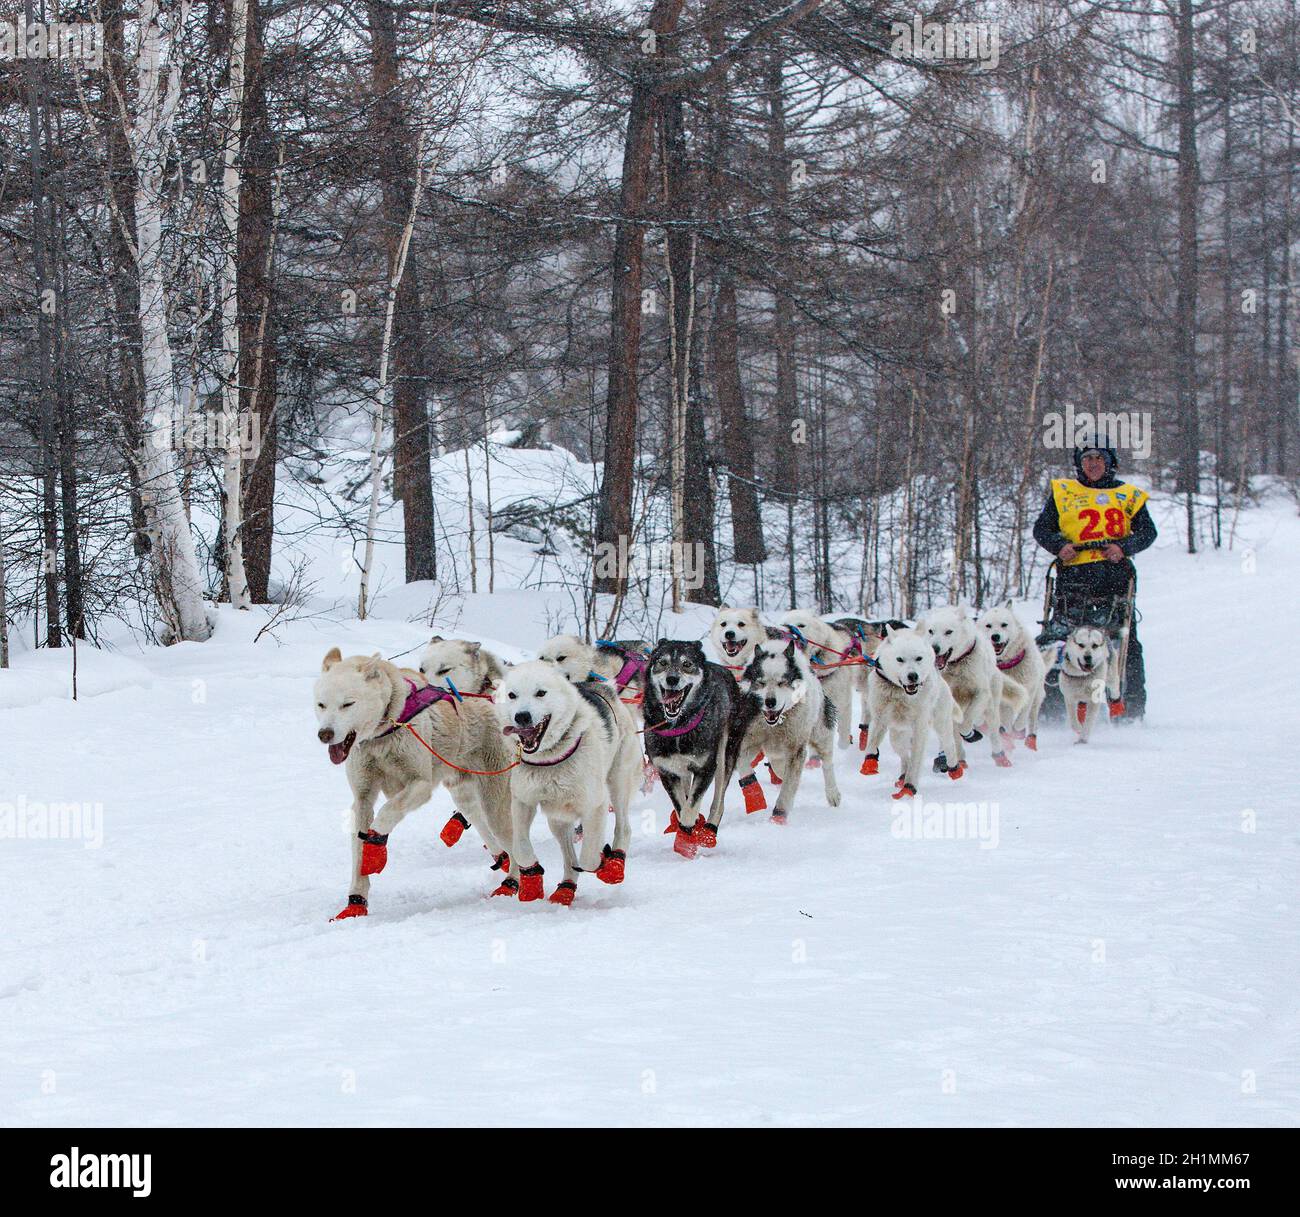 ESSO VILLAGE, KAMCHATKA, RUSSIA - MARCH 4, 2019: Running dog sledge team Kamchatka musher. Kamchatka Sled Dog Racing Beringia. Russian Far East, Kamch Stock Photo